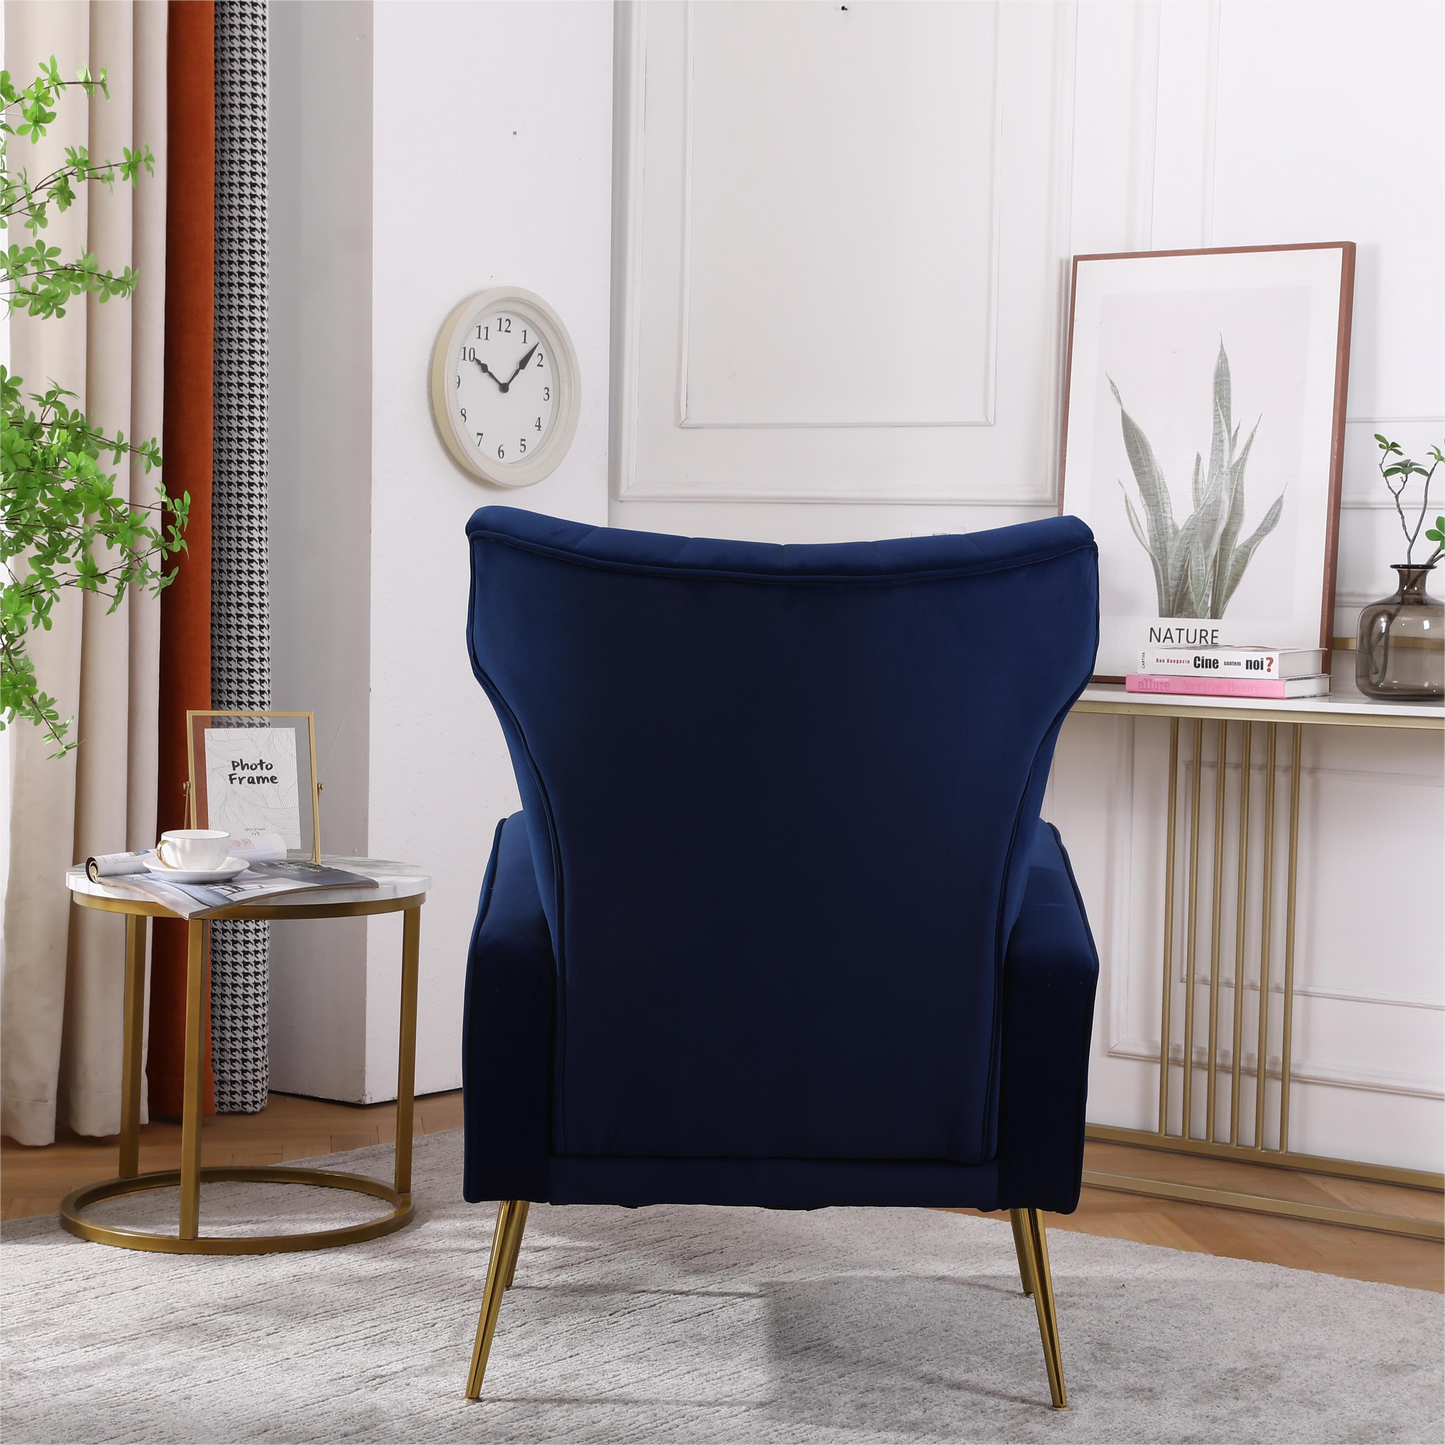 FONDHOME Velvet Accent Chair, Modern Living Room Armchair Comfy Upholstered Single Sofa Chair for Bedroom Dorms Reading Reception Room with Gold Legs & Small Pillow, Royal Blue